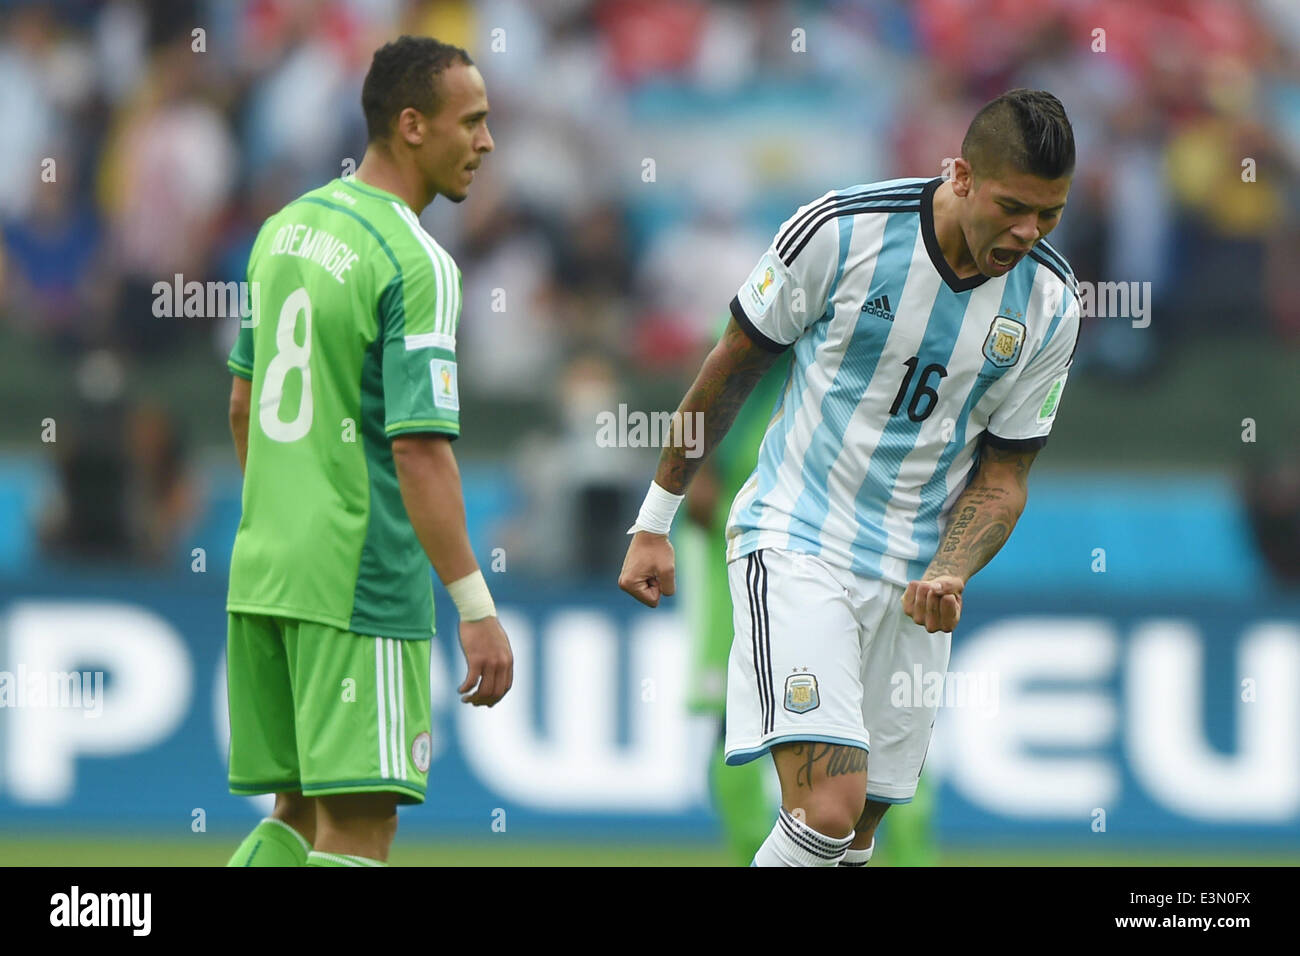 Porto Alegre, Brazil. 25th June, 2014. PORTO ALEGRE BRAZIL -15 Jun: Marcos Rojo and Odemwingie in the match between Argentina and Nigeria, corresponding to the group F of the World Cup 2014, played at the Beira Rio stadium, on June 25, 2014. Photo: Edu Andrade/Urbanandsport/Nurphoto Credit:  Edu Andrade/NurPhoto/ZUMAPRESS.com/Alamy Live News Stock Photo